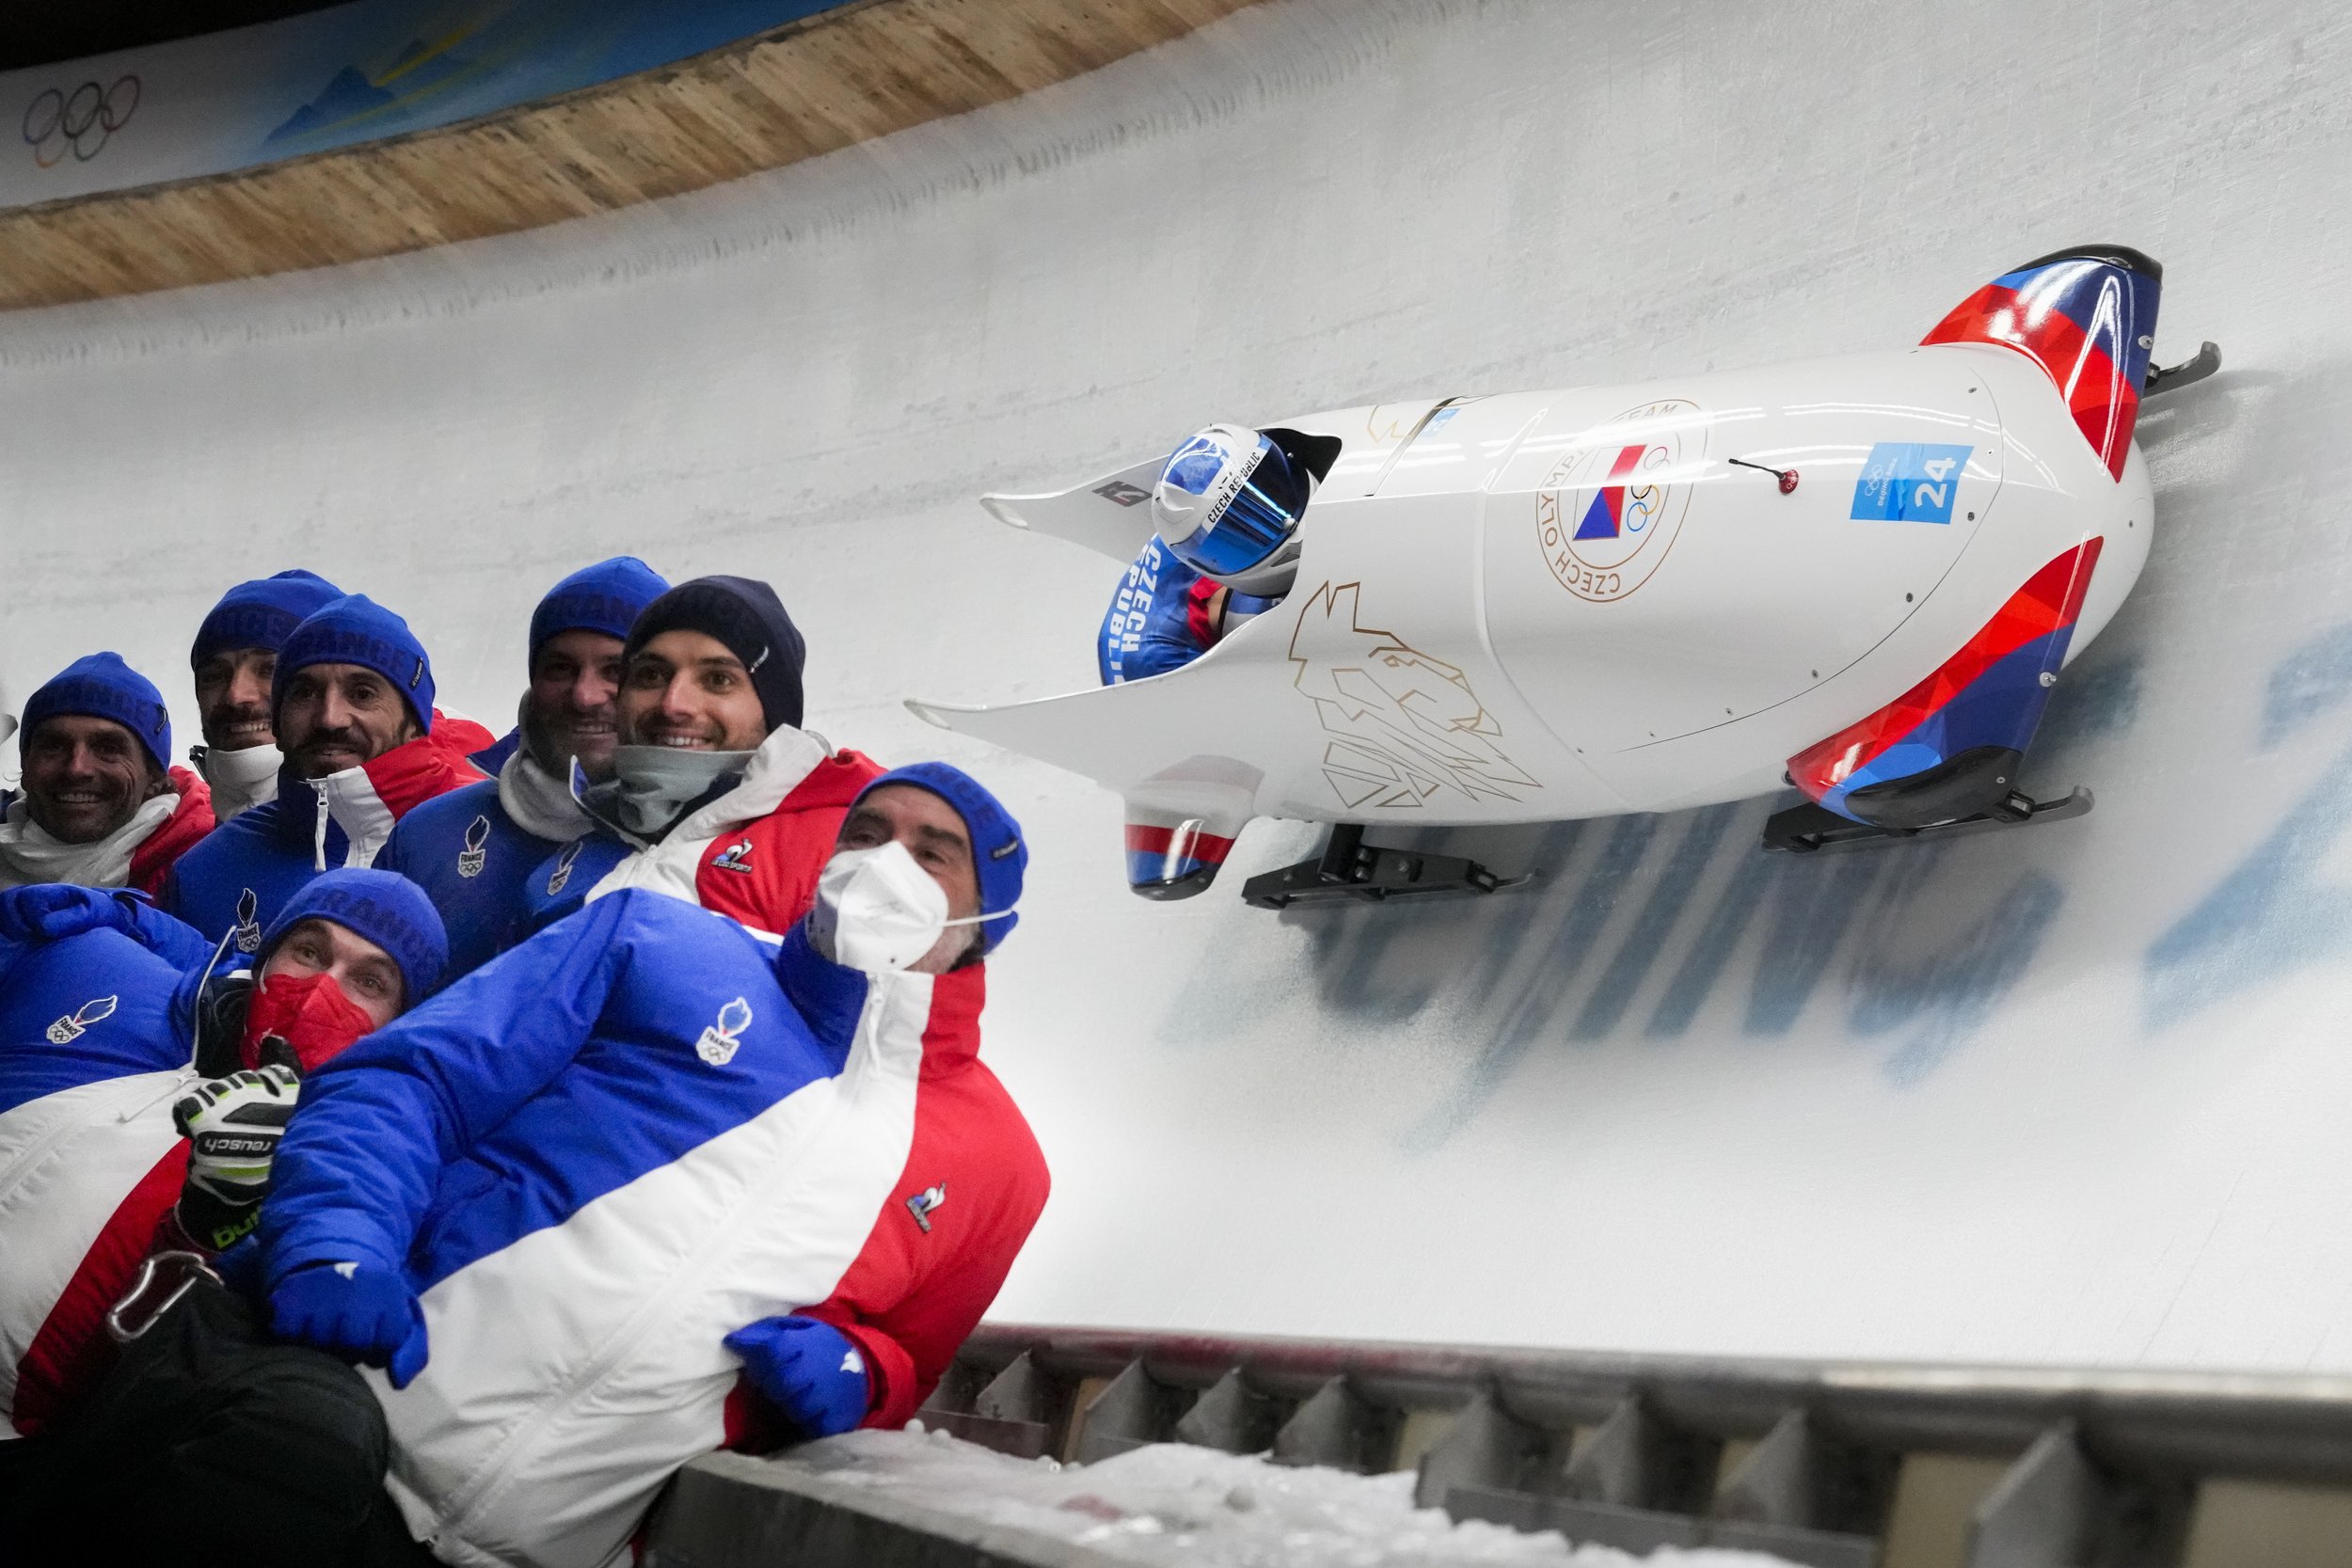  Members of the Czech Republic team pose for a photo as teammates Dominik Dvorak and Jakub Nosek slide past during the 2-man heat 1 at the 2022 Winter Olympics, Monday, Feb. 14, 2022, in the Yanqing district of Beijing. (AP Photo/Dmitri Lovetsky) 